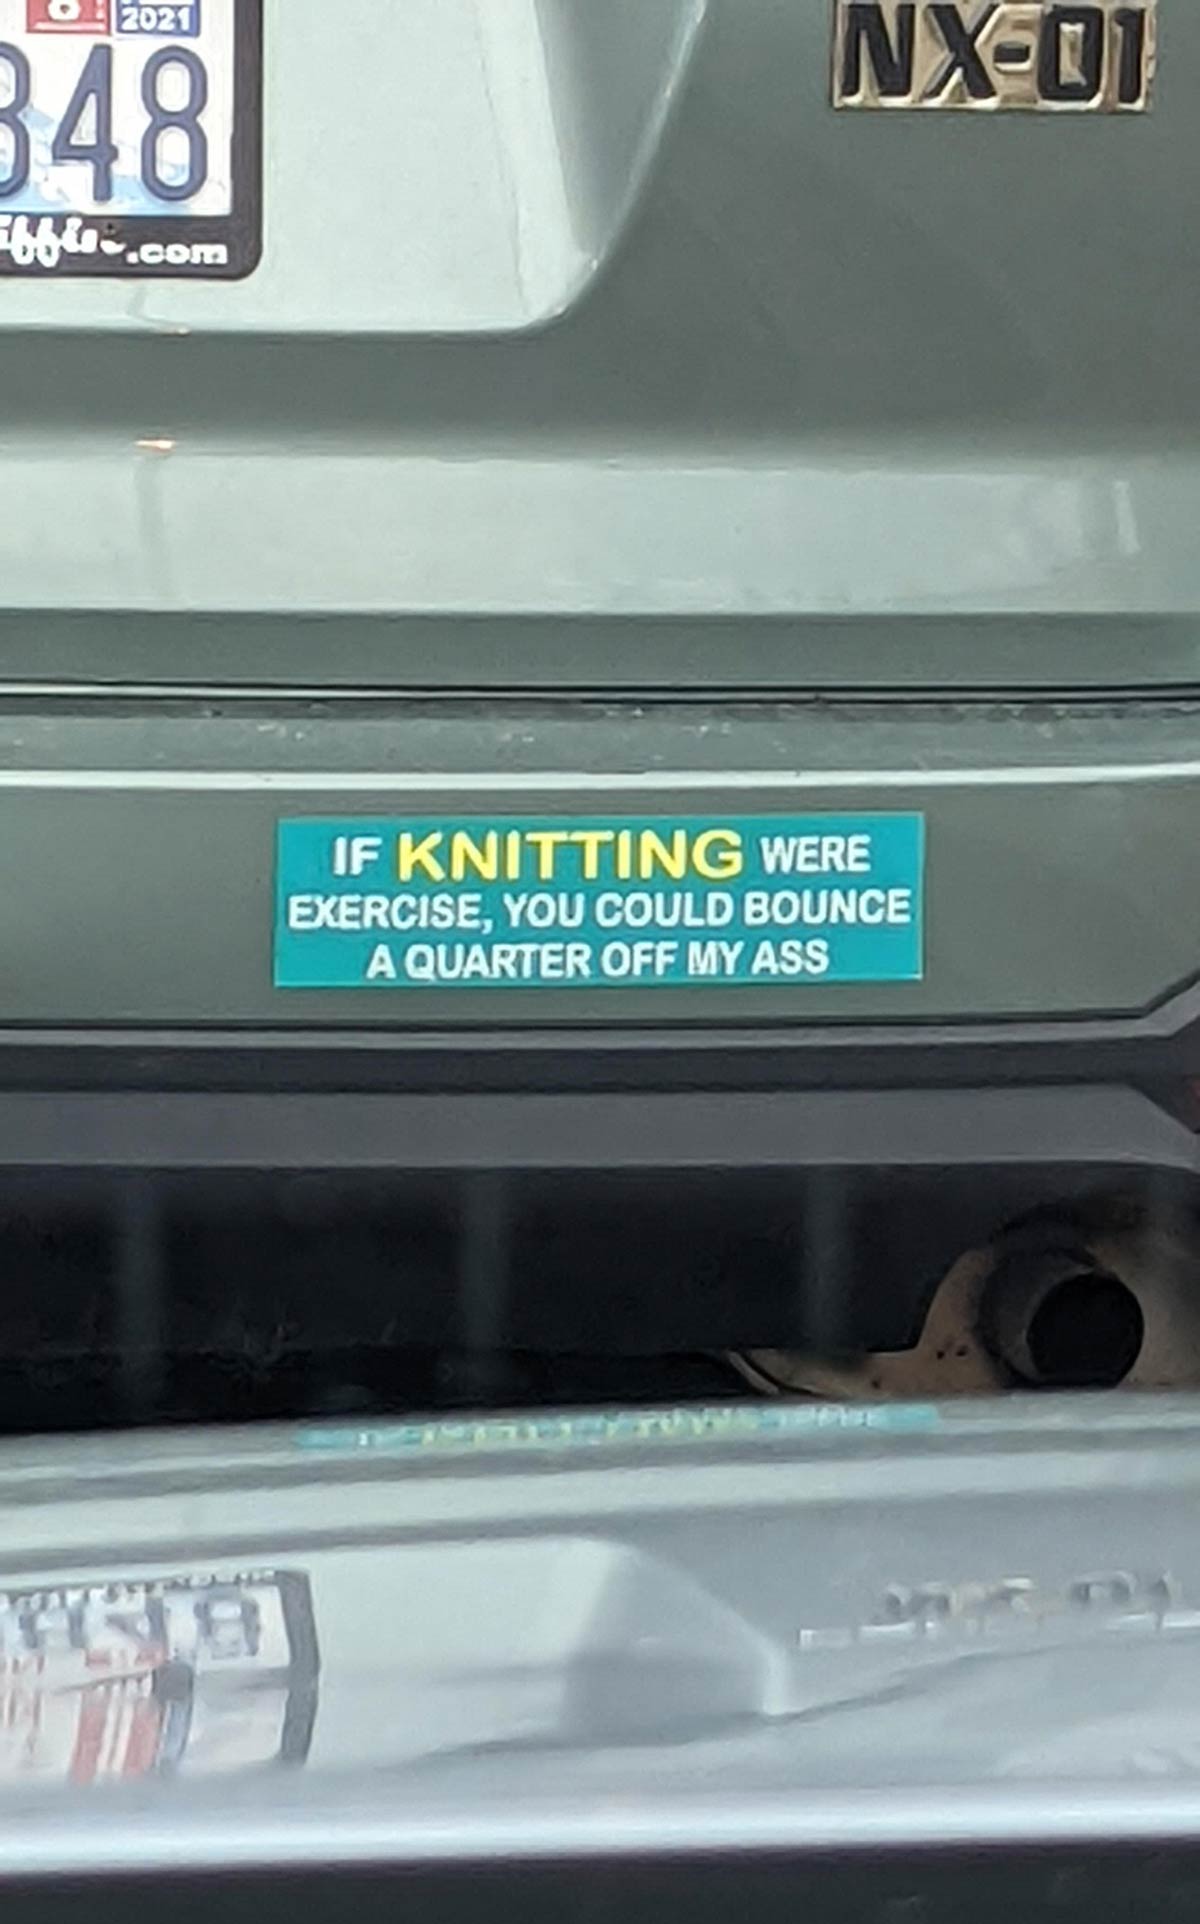 Seen on the back of a 70-year-old woman's Subaru Forester